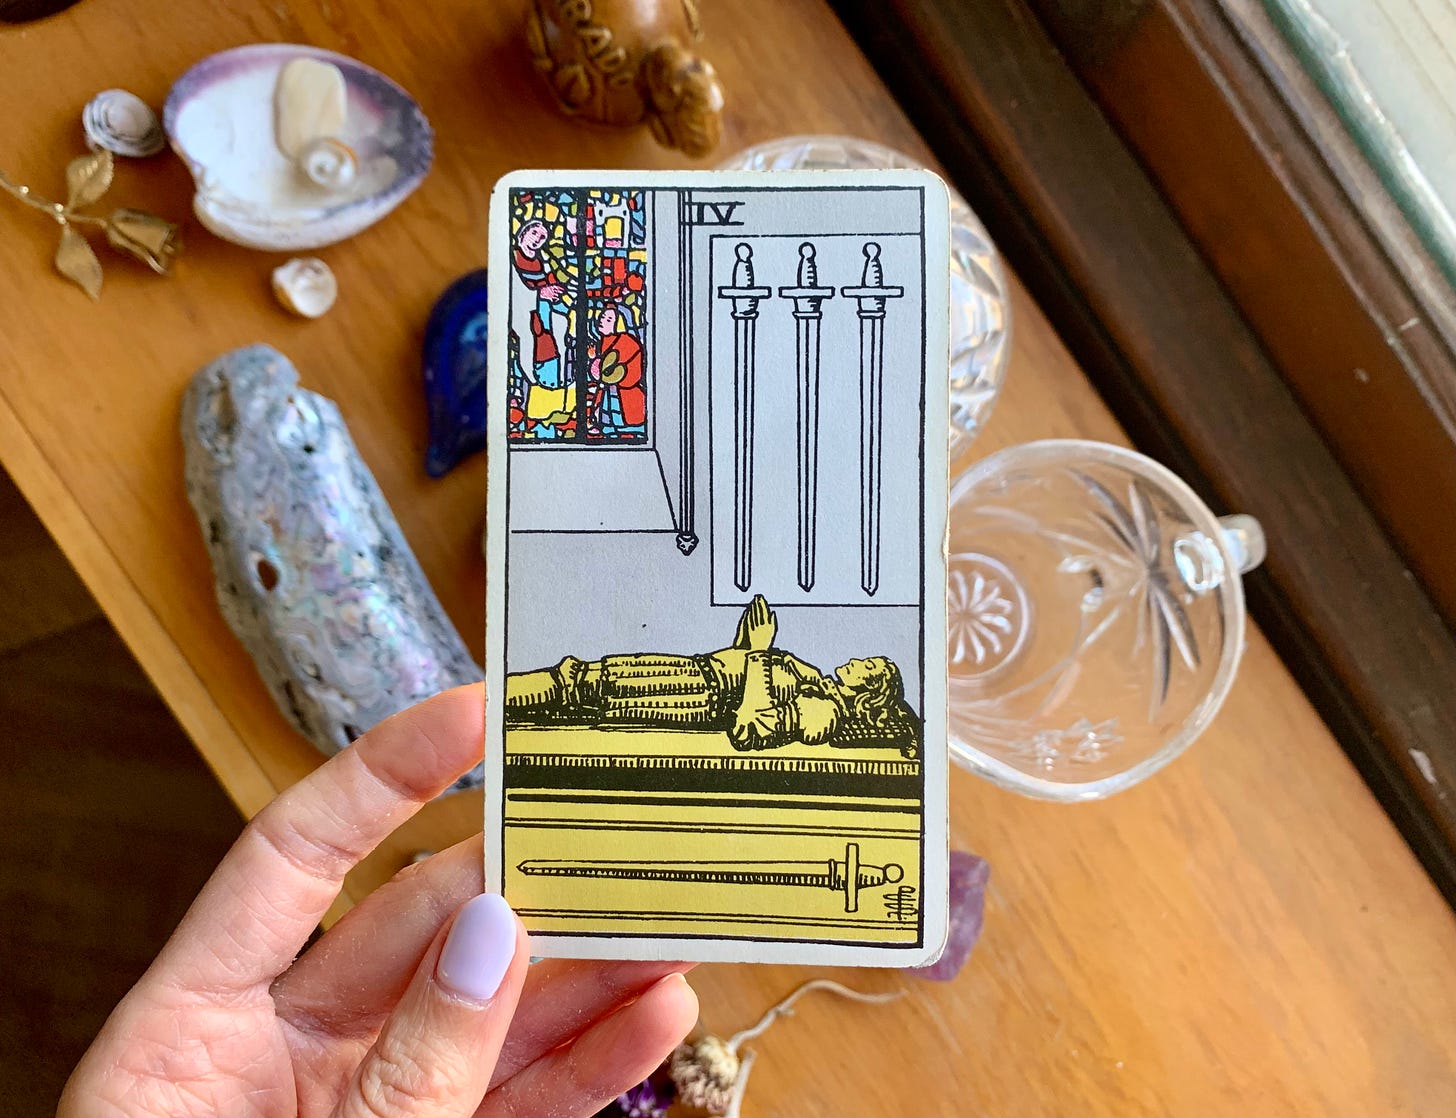 A hand is holding a tarot card, four of swords by pamela colman smith. In the image, a person is laying in a sarcophagus with their hands folded in prayer position over their chest. There is a stained glass window and three swords on the wall. Behind the card is a wooden shelf with various items on it, some shells, a gold rose pin, a vintage sugar bowl. 